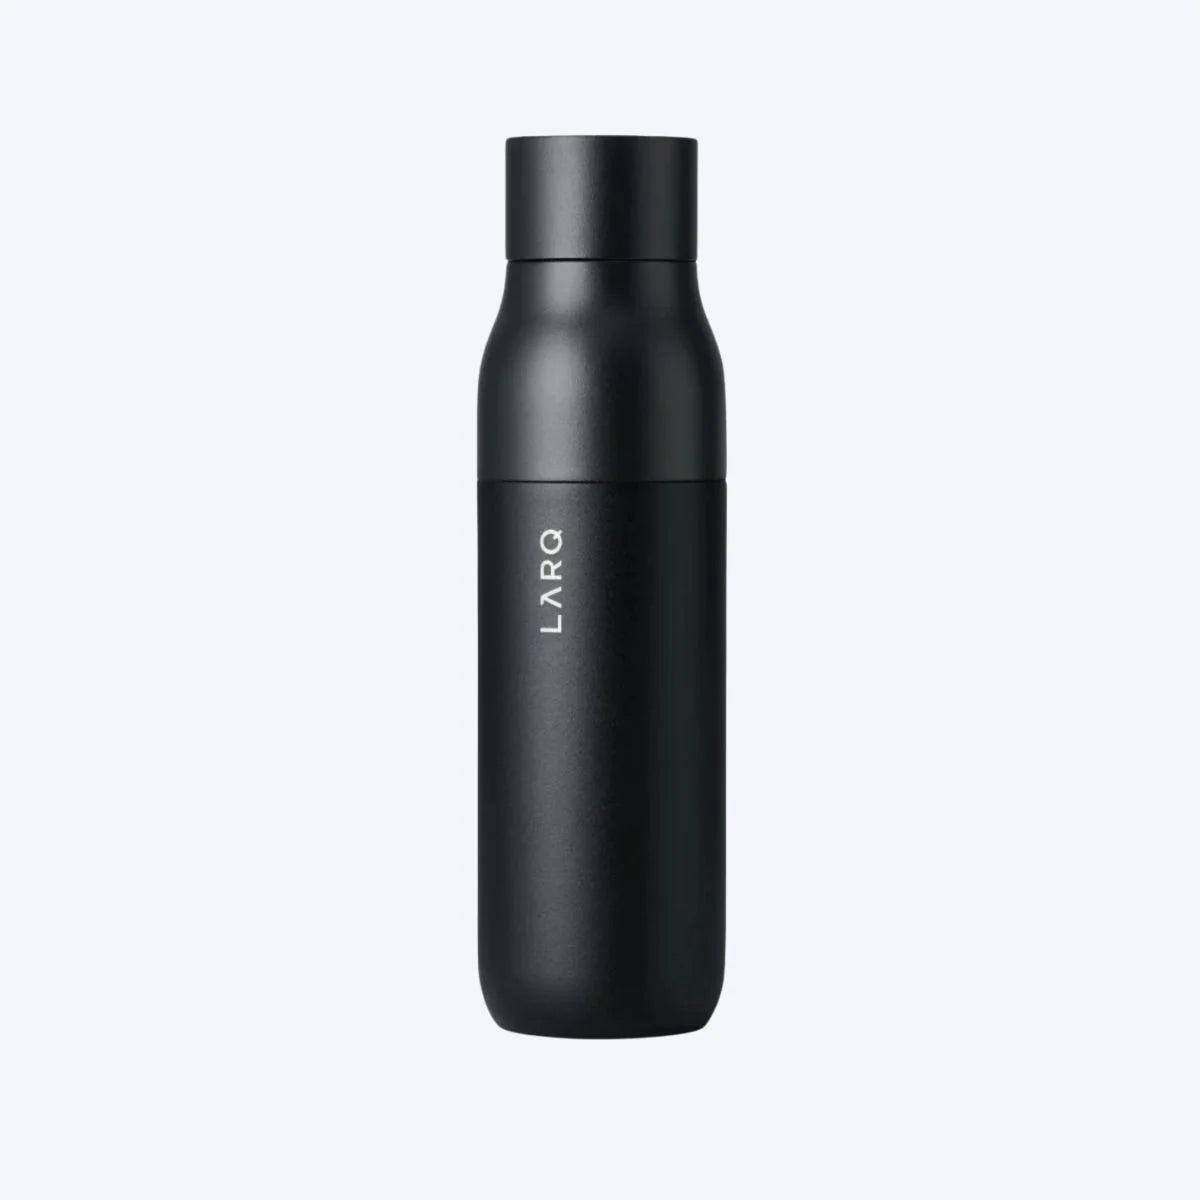 The LARQ self-cleaning water bottle in black.